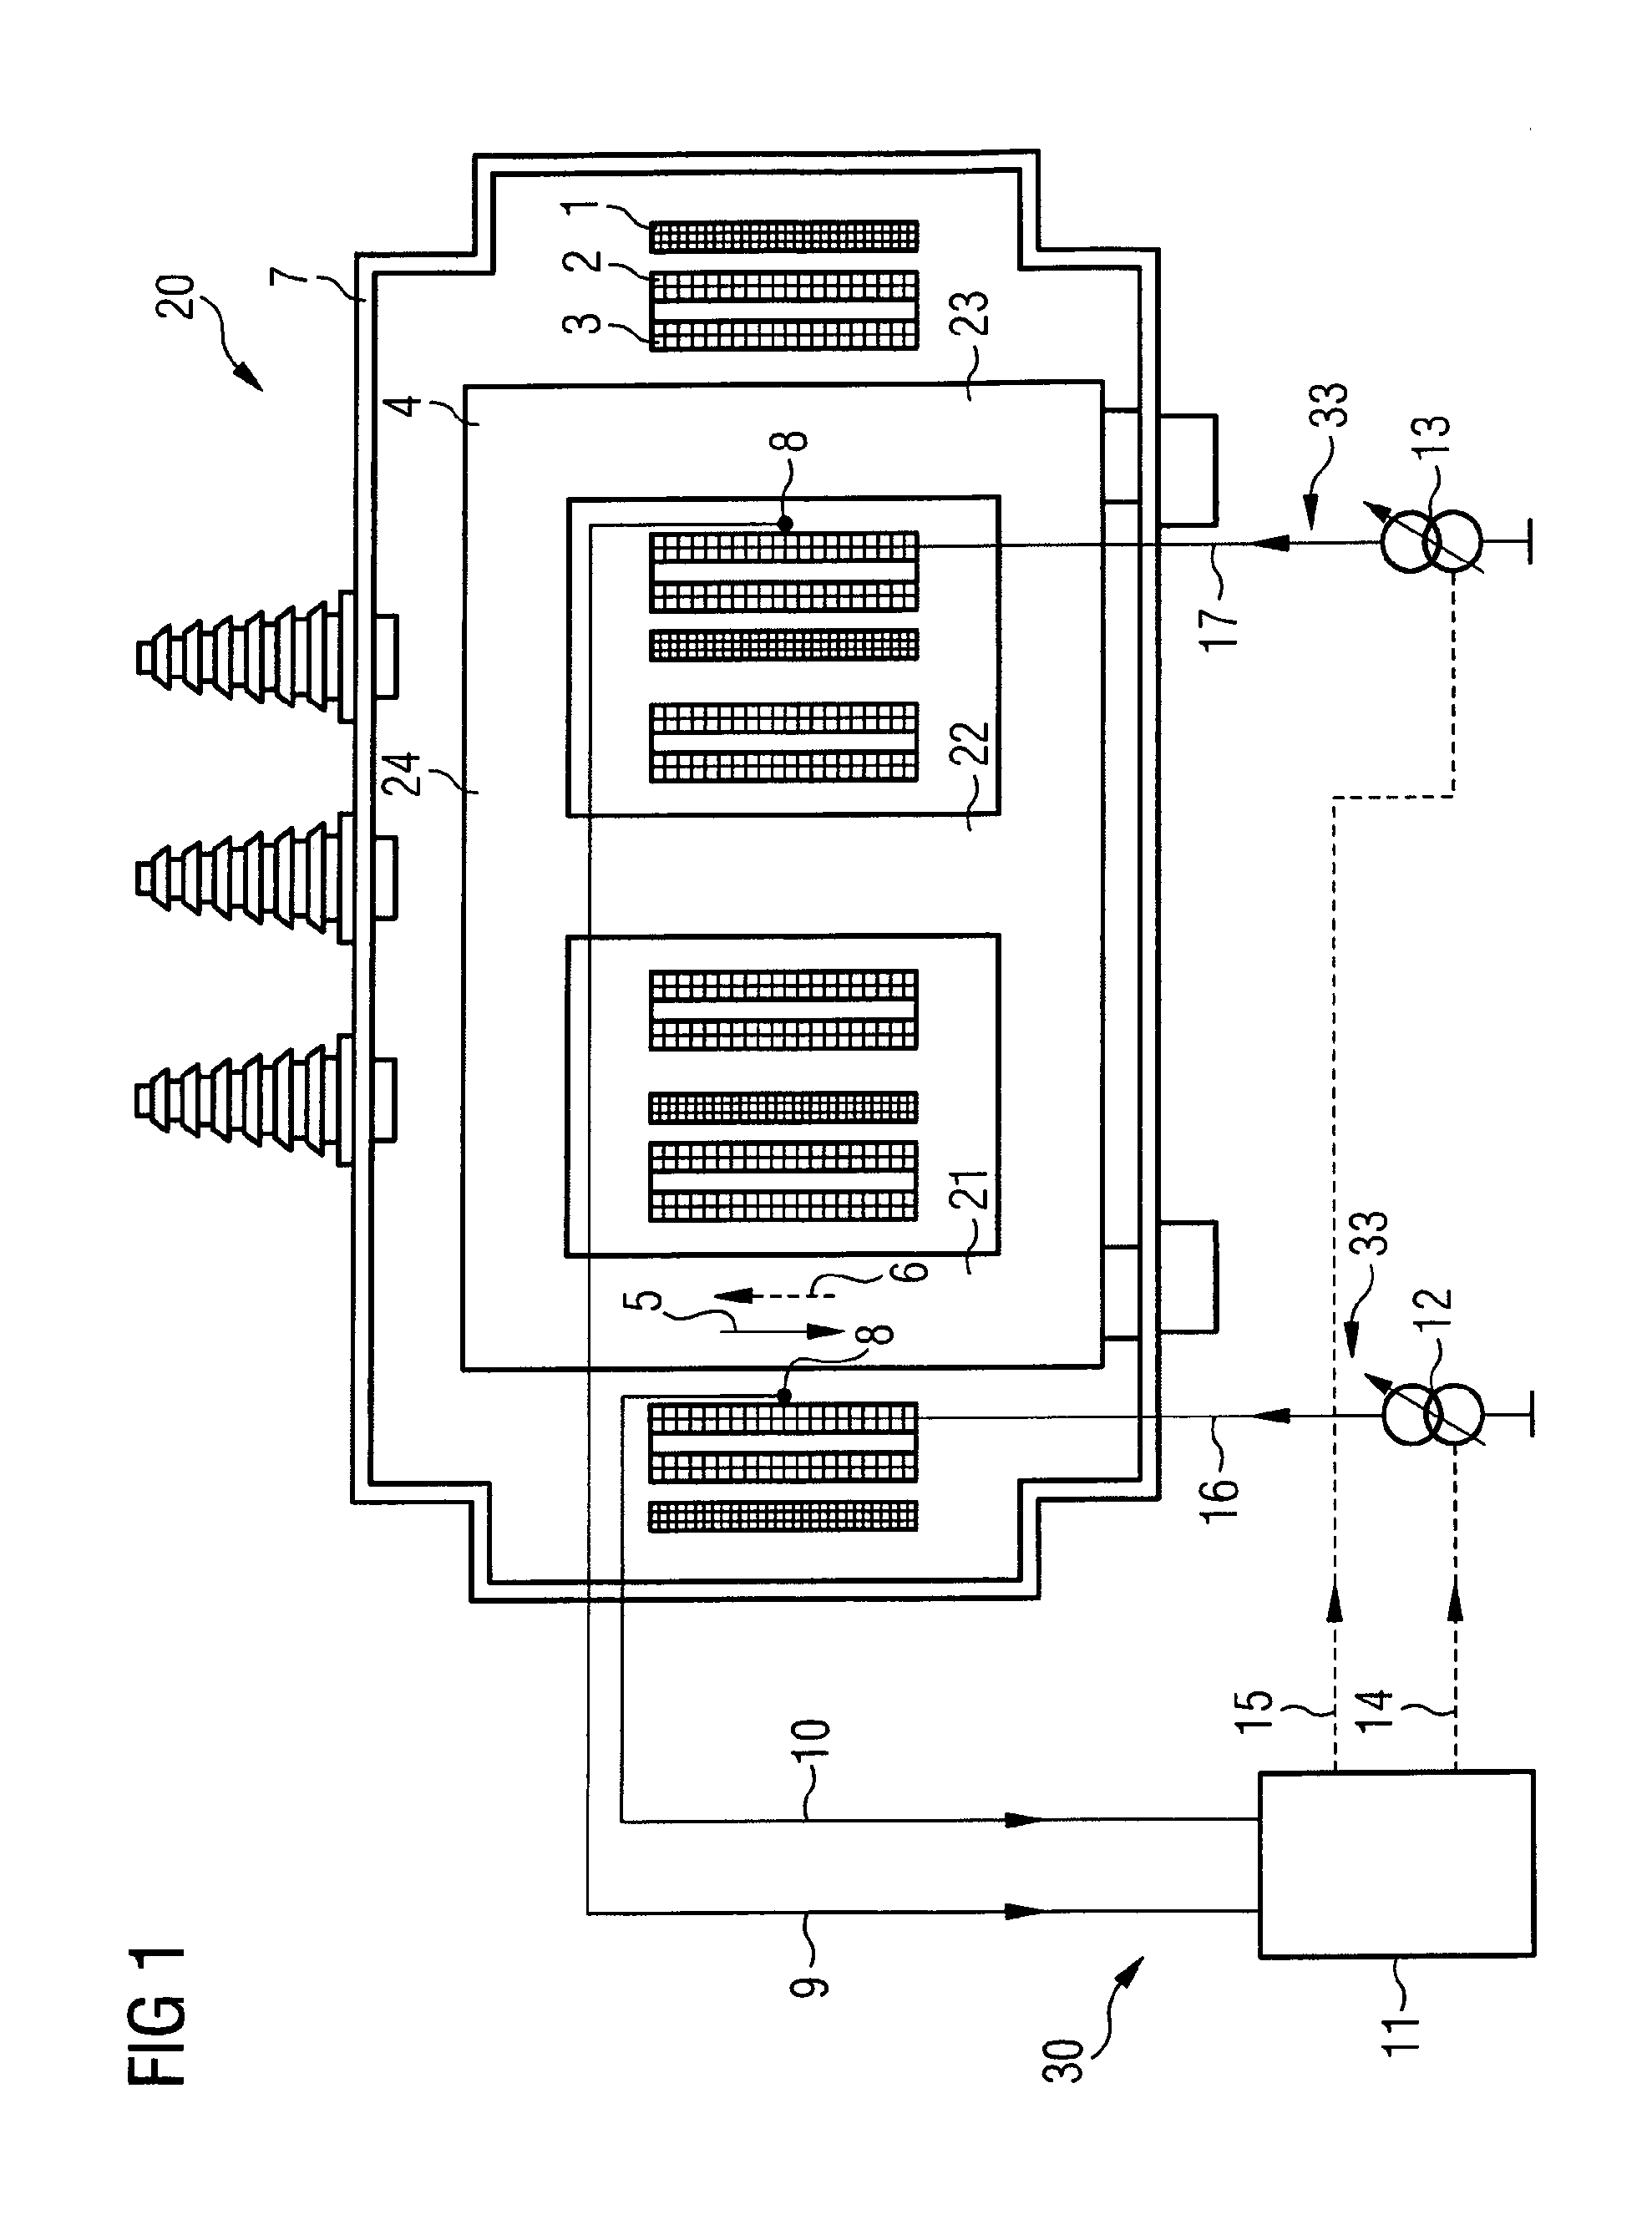 Electrical Transformer with Unidirectional Flux Compensation